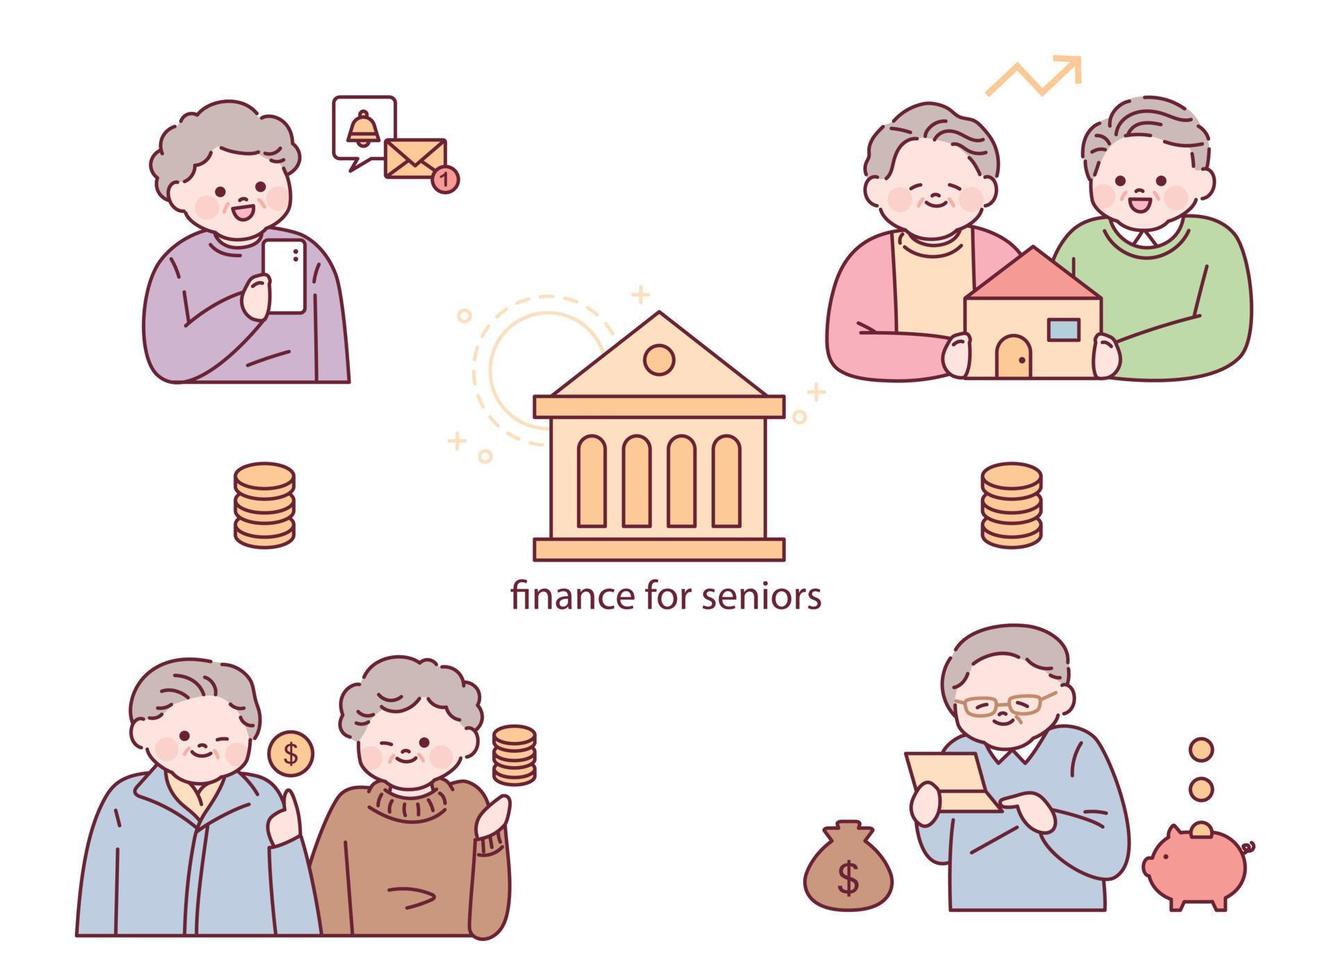 Old age money management. Grandpa and Grandma are saving money in the bank. outline simple vector illustration.